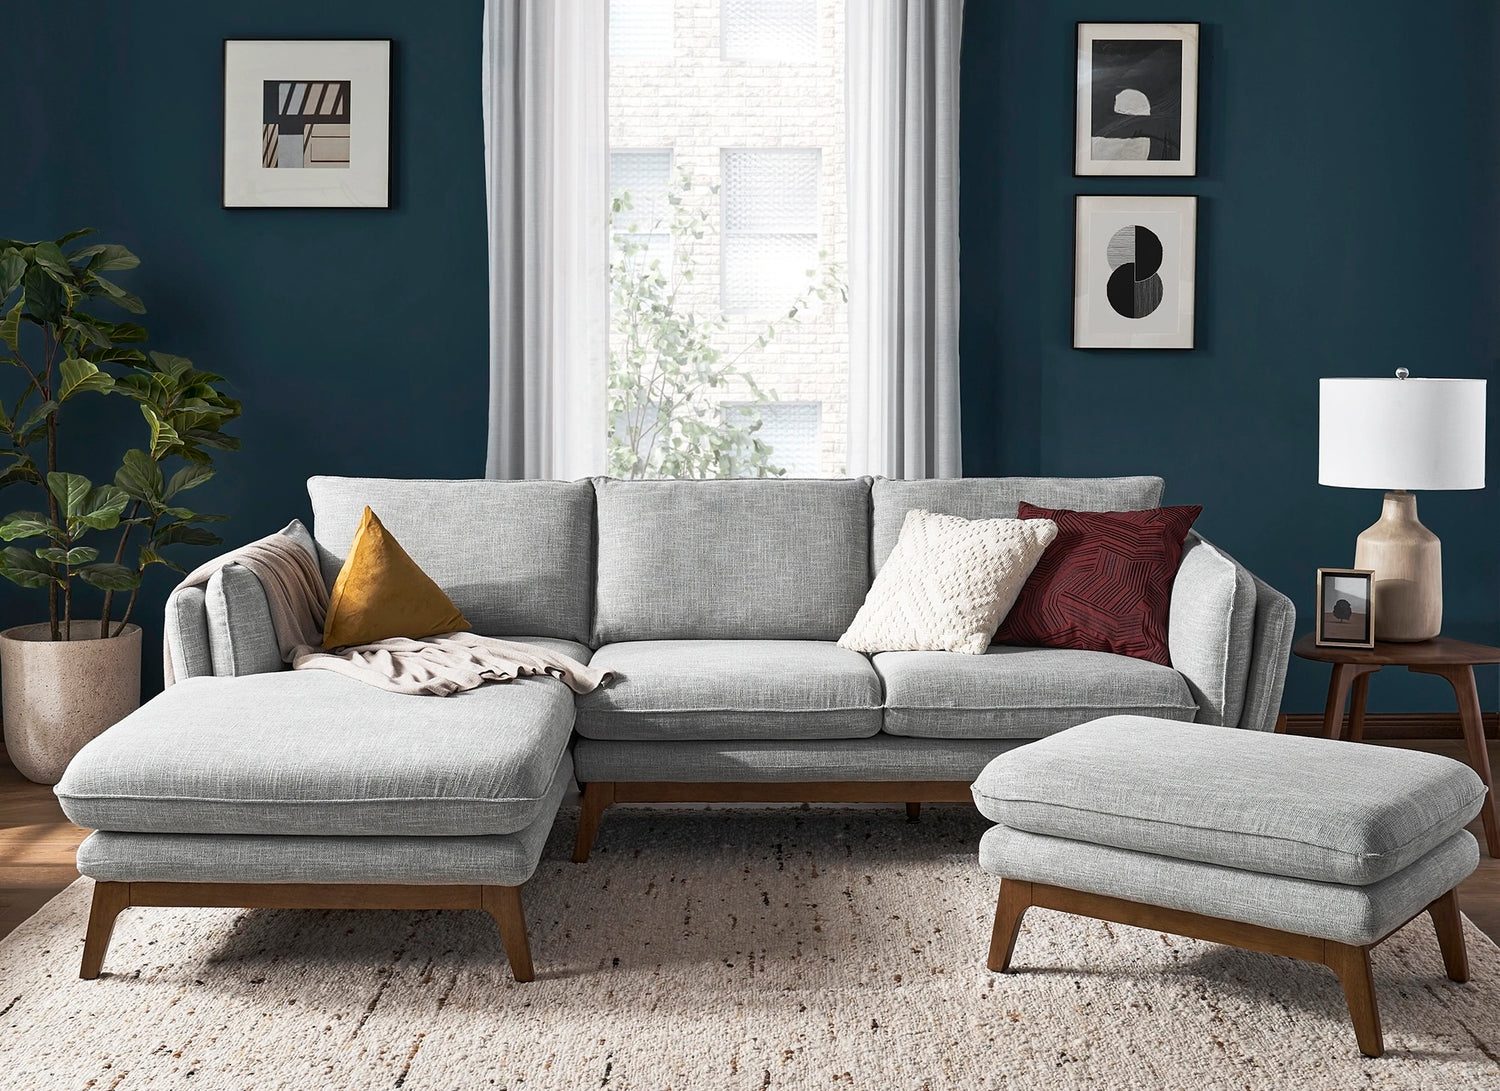 A modern living room with a gray sectional sofa and matching ottoman featuring mid-century wooden legs. The sofa is accented with three throw pillows. Behind the sofa are two framed art pieces and a window with white curtains. A potted plant and table lamp are on either side.